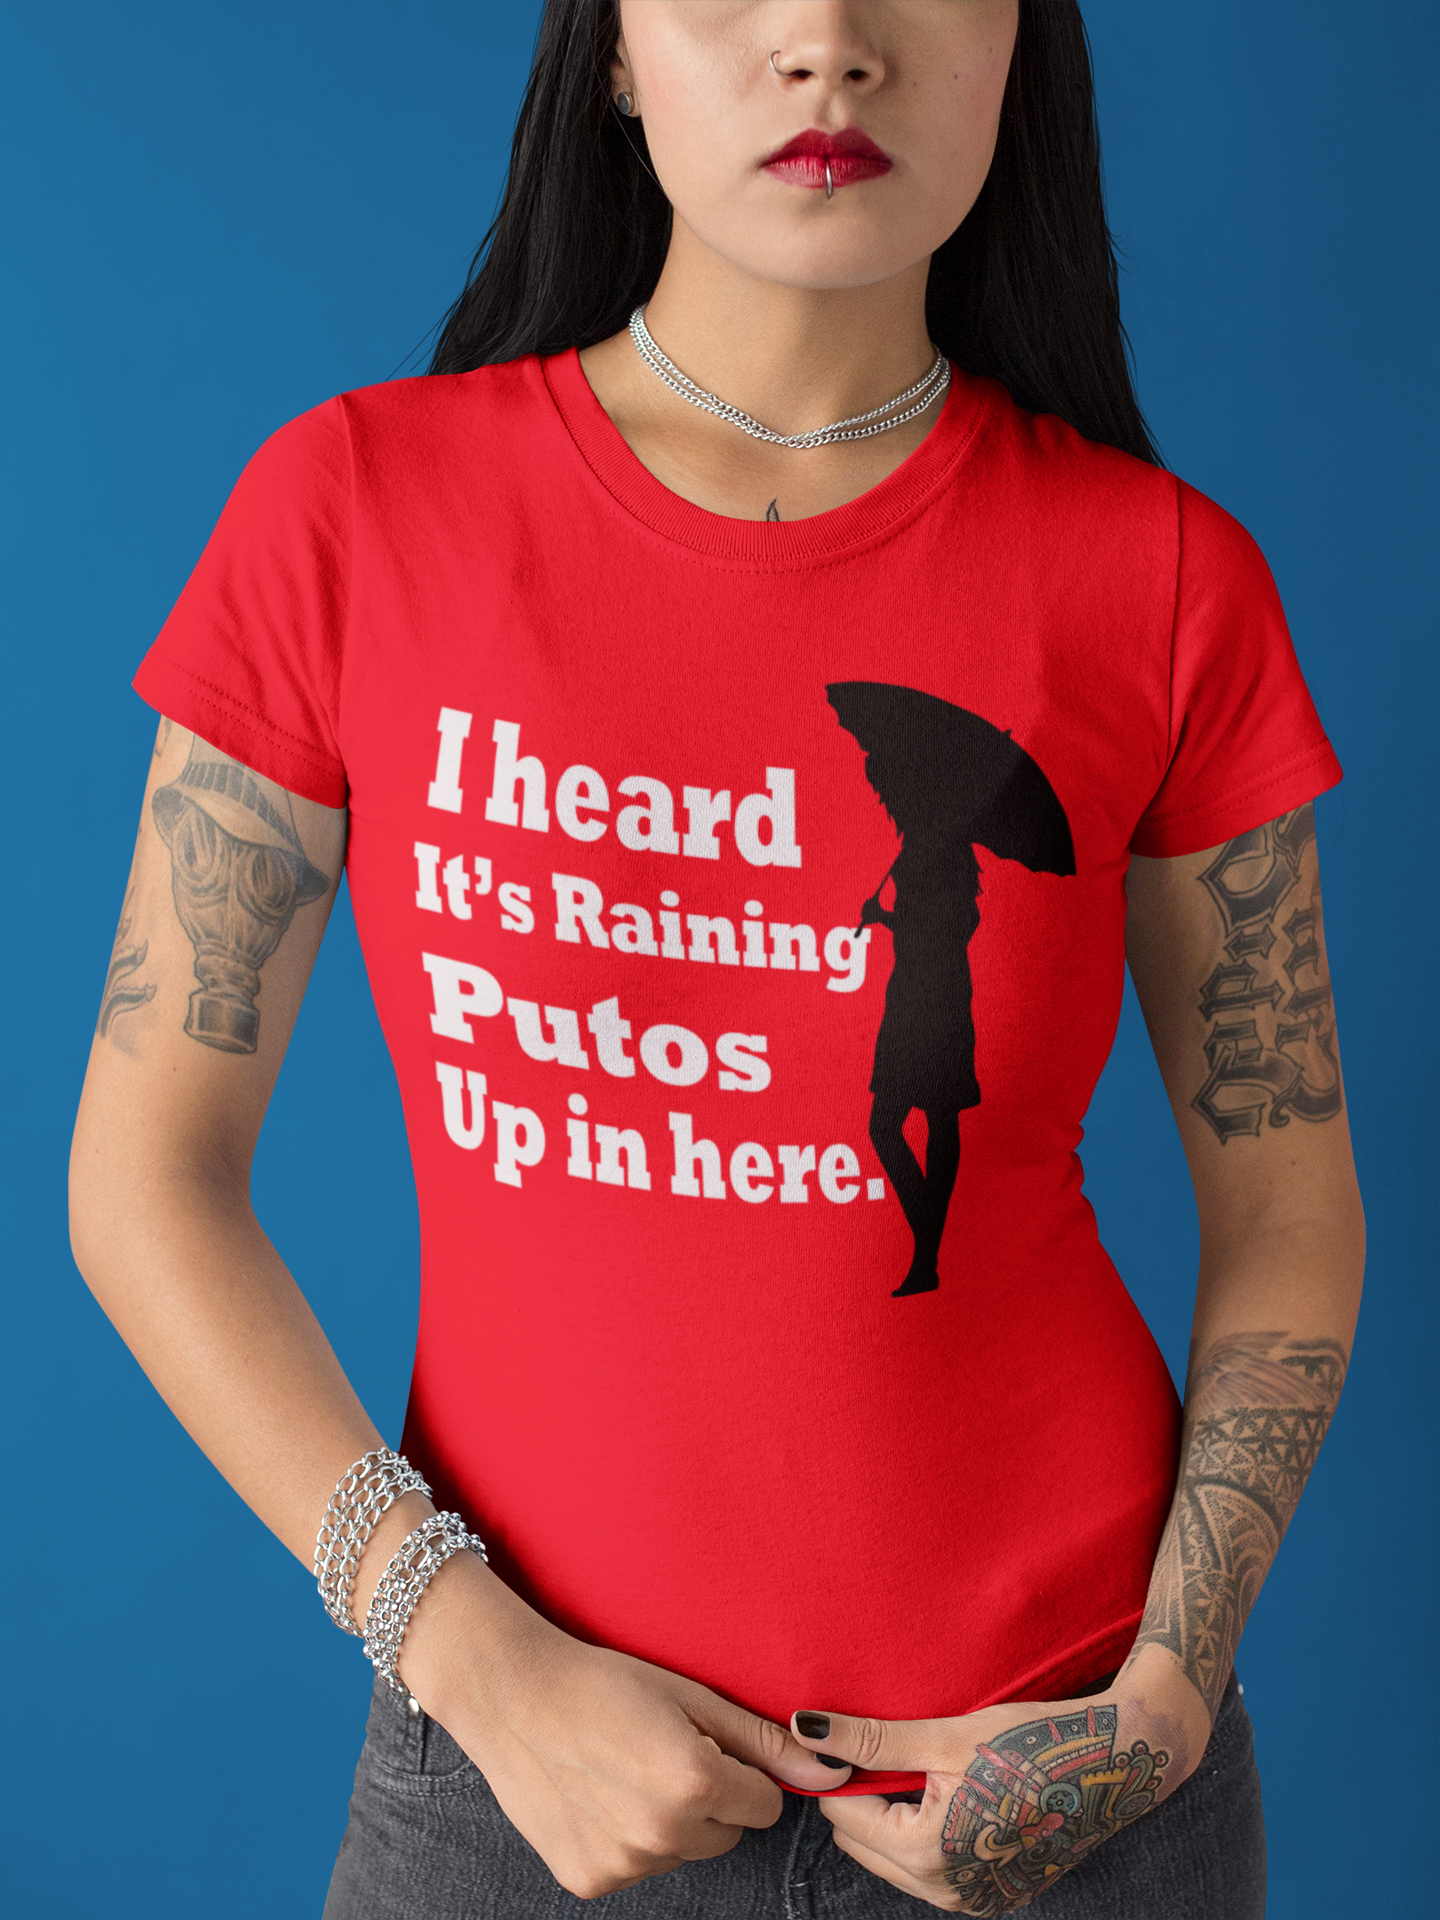 Red T-shirt with the text, "I heard it's raining putos up in here" in white ink and a shadow woman holding an umbrella in black. This sassy tee comes in sizes small thru 4XL. It is available at www.sanchezhere.com